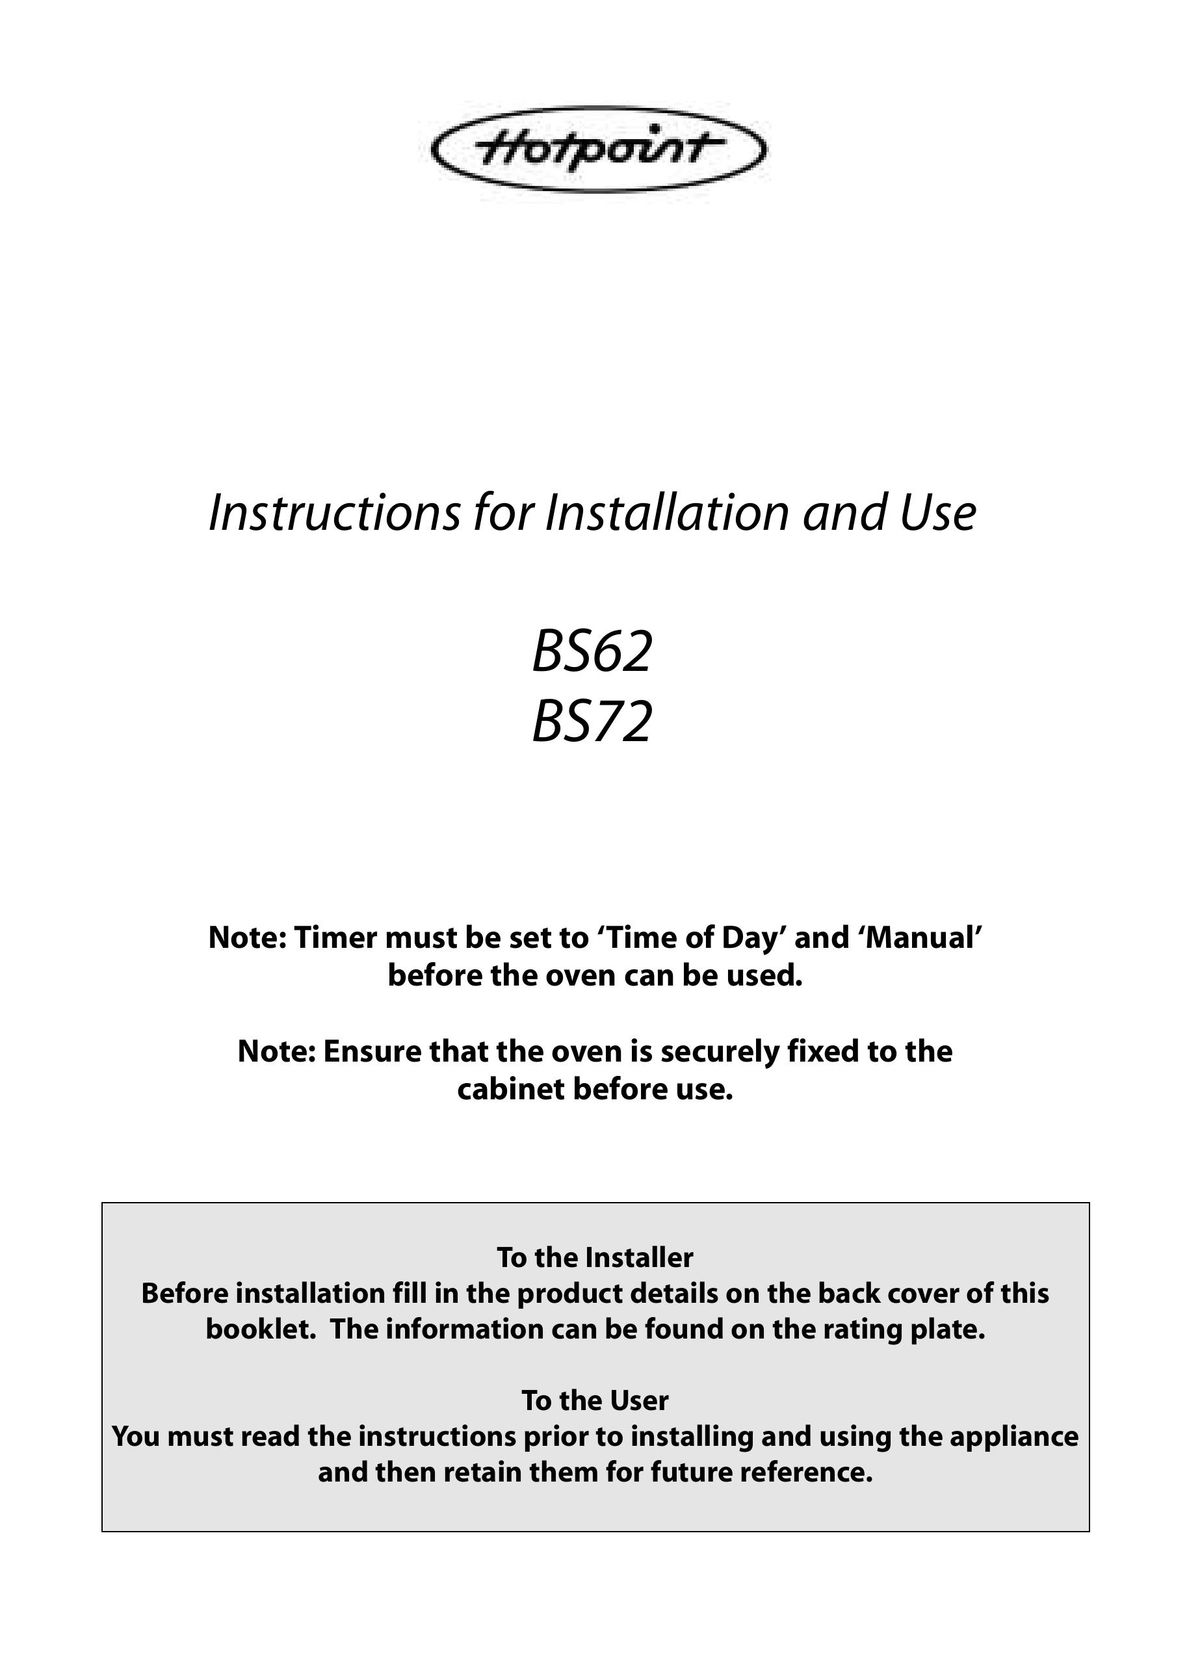 Hotpoint BS62 Oven User Manual